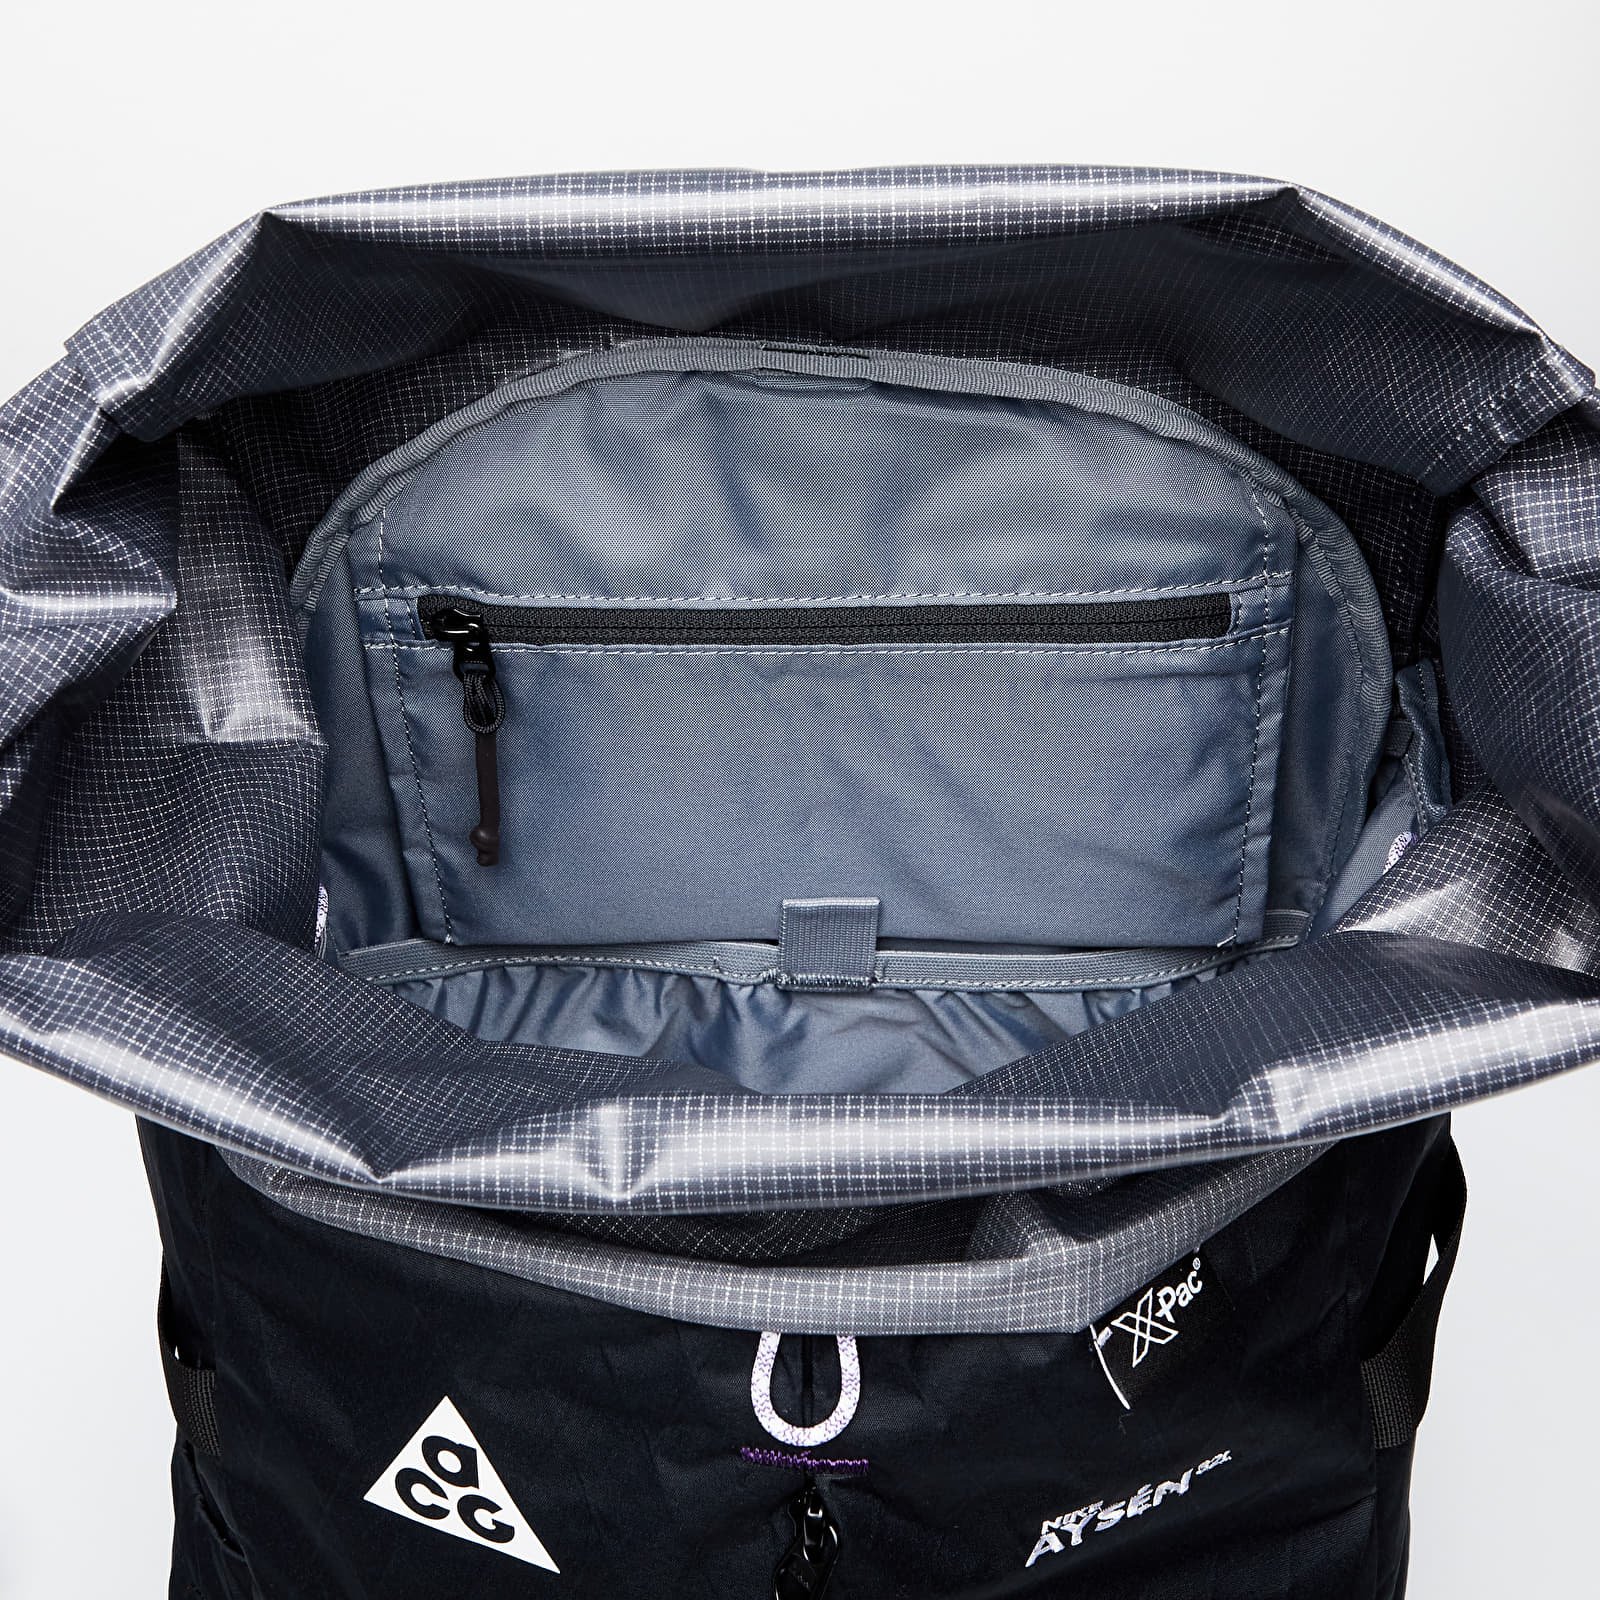 Aysén Day Pack Backpack